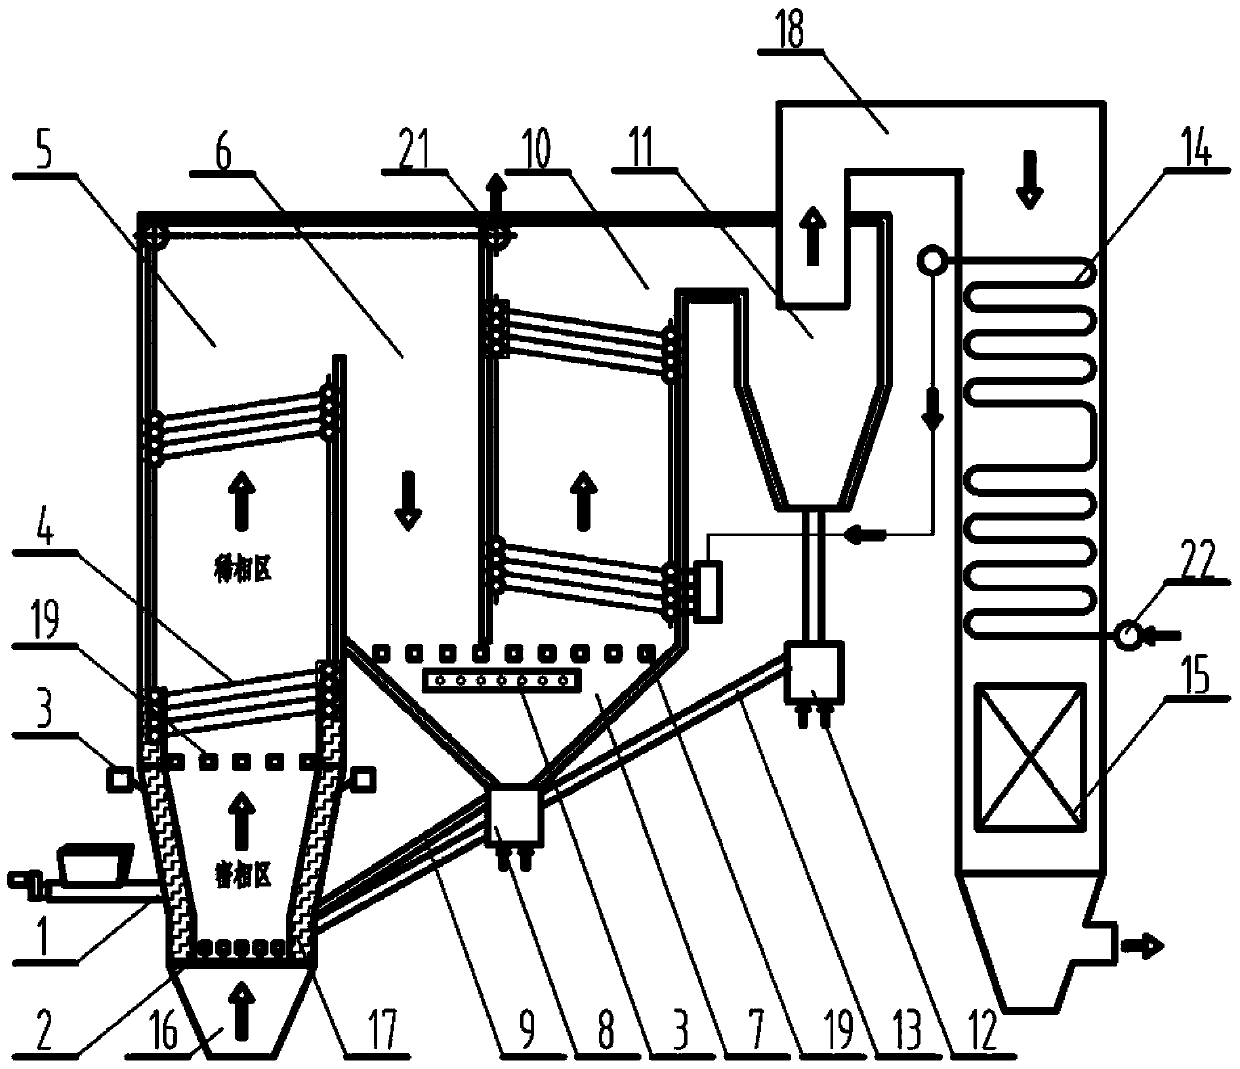 Heat-conduction oil furnace of horizontal circulating fluidized bed